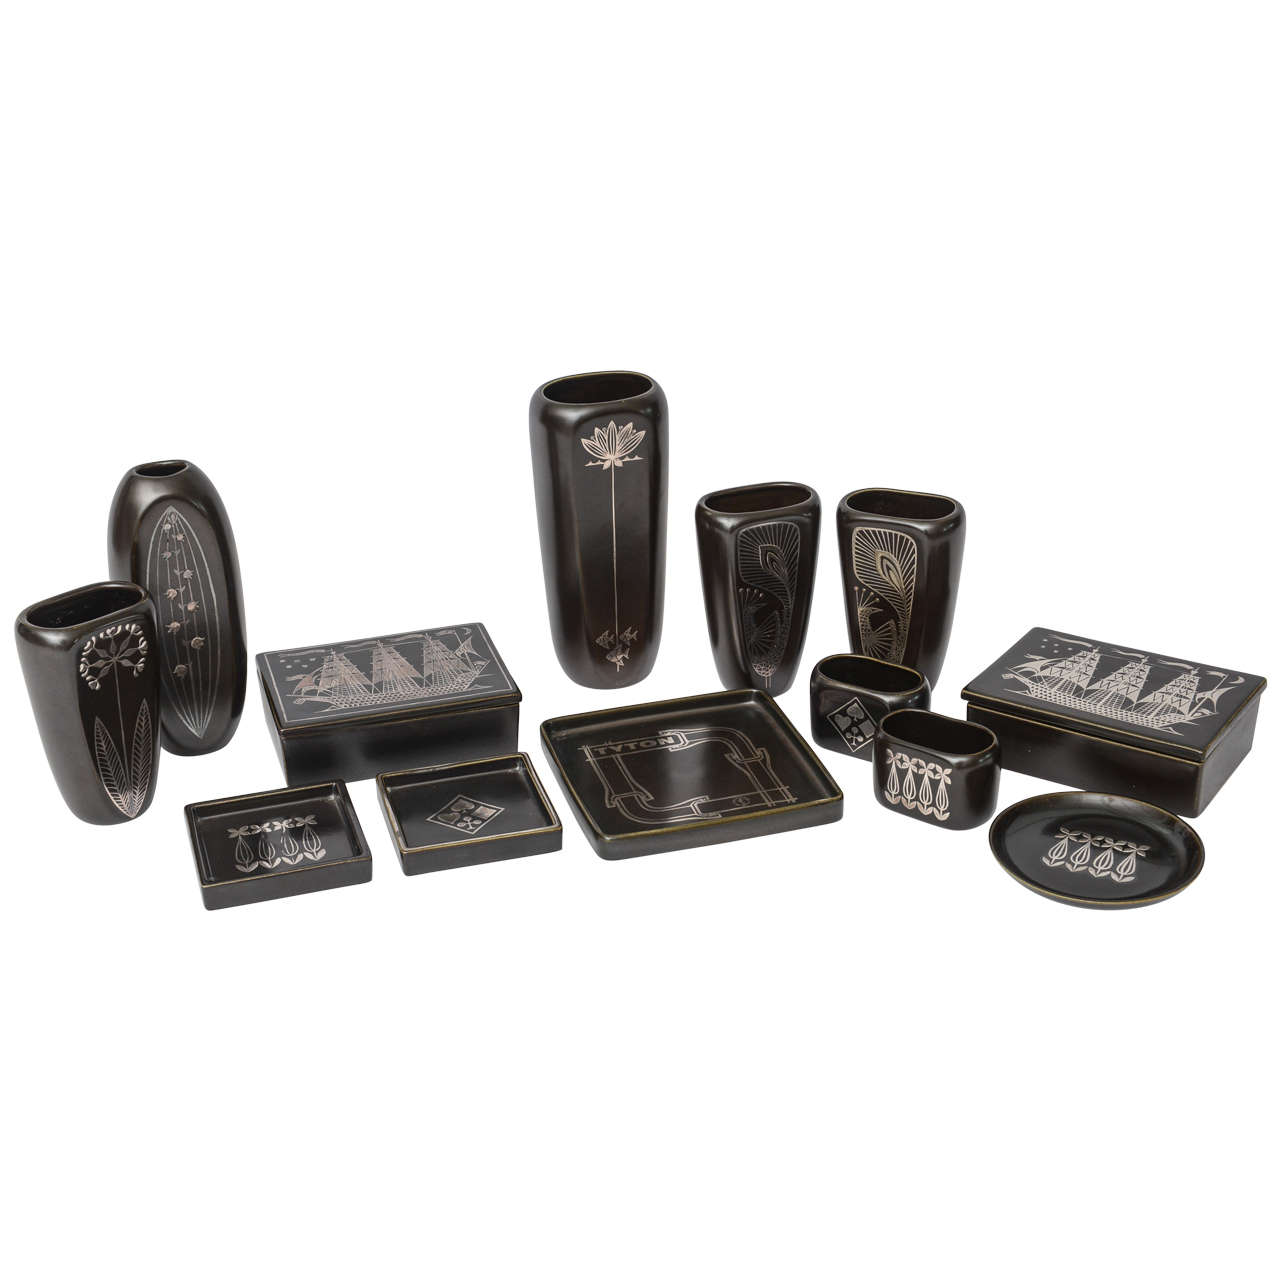 Collection of Gustavsberg "Argenta" Ceramics in Black Glaze with Silver Inlay For Sale